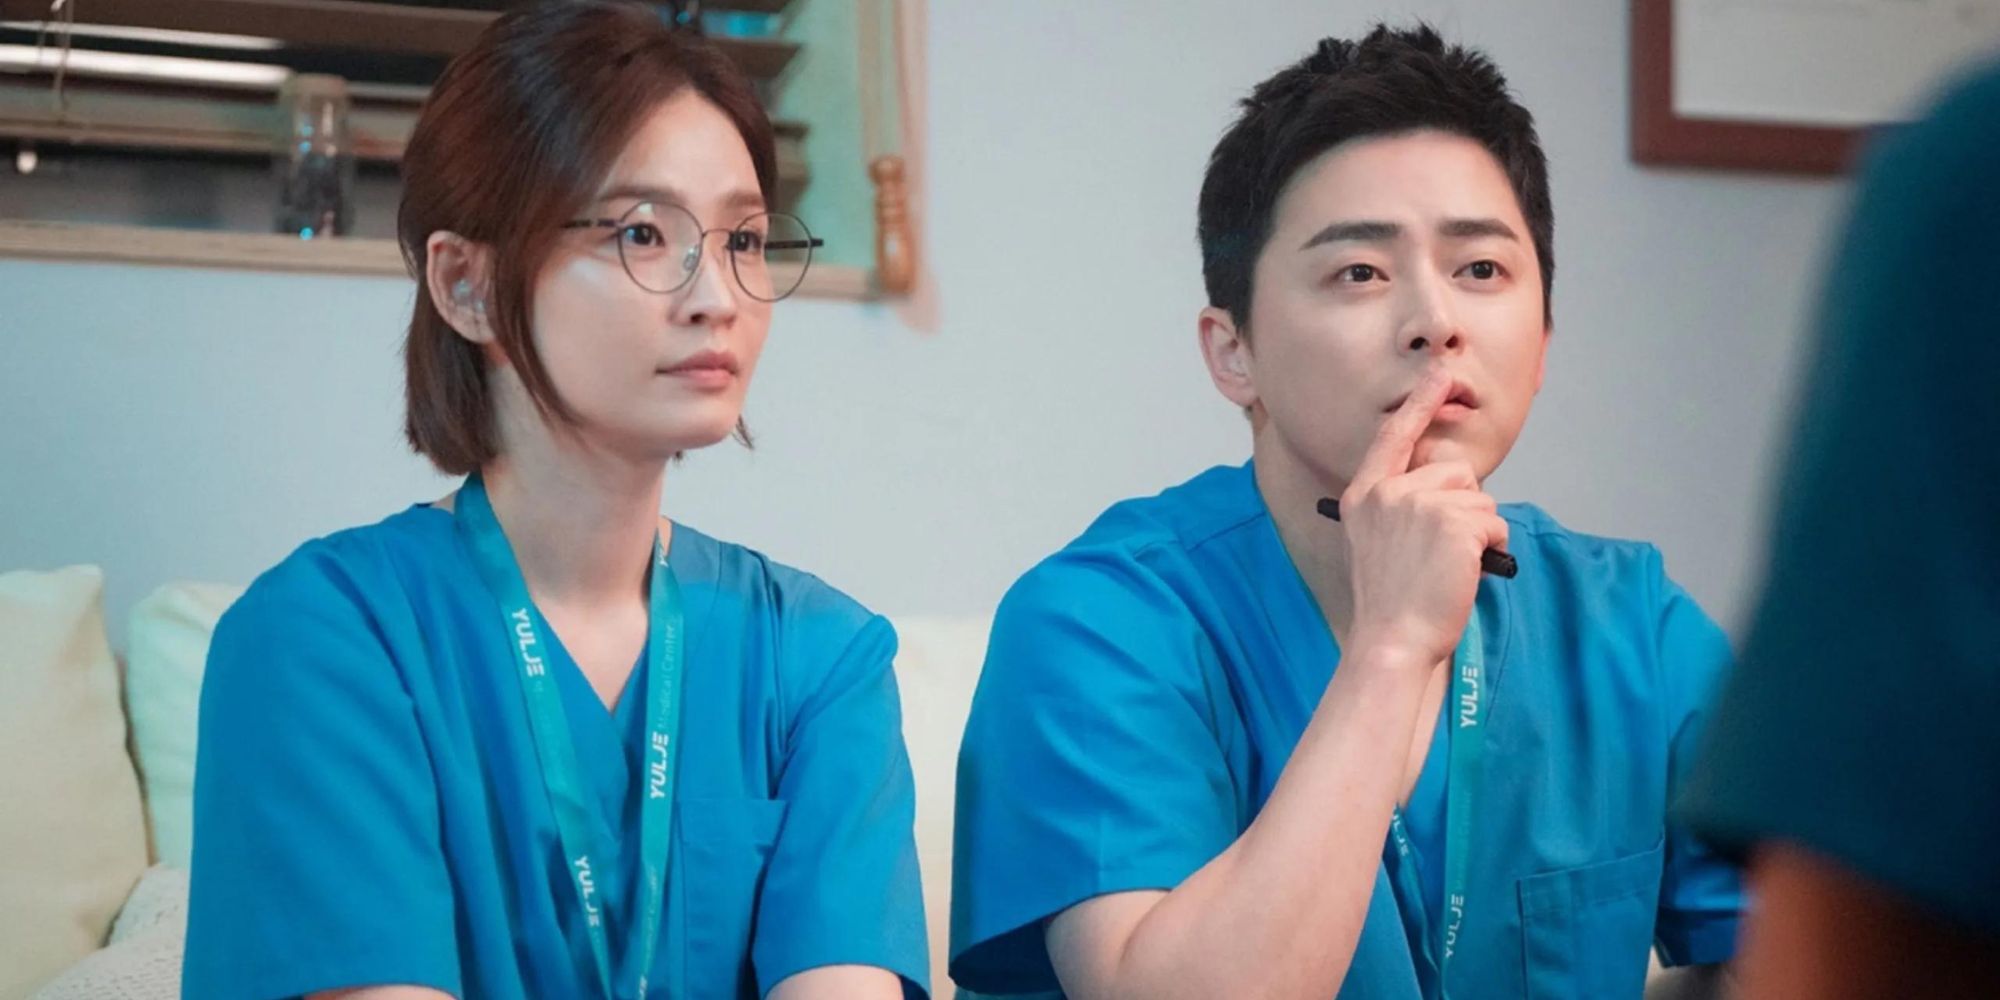 Chae Song Hwa and Lee Ik Jun from Hospital Playlist sitting together